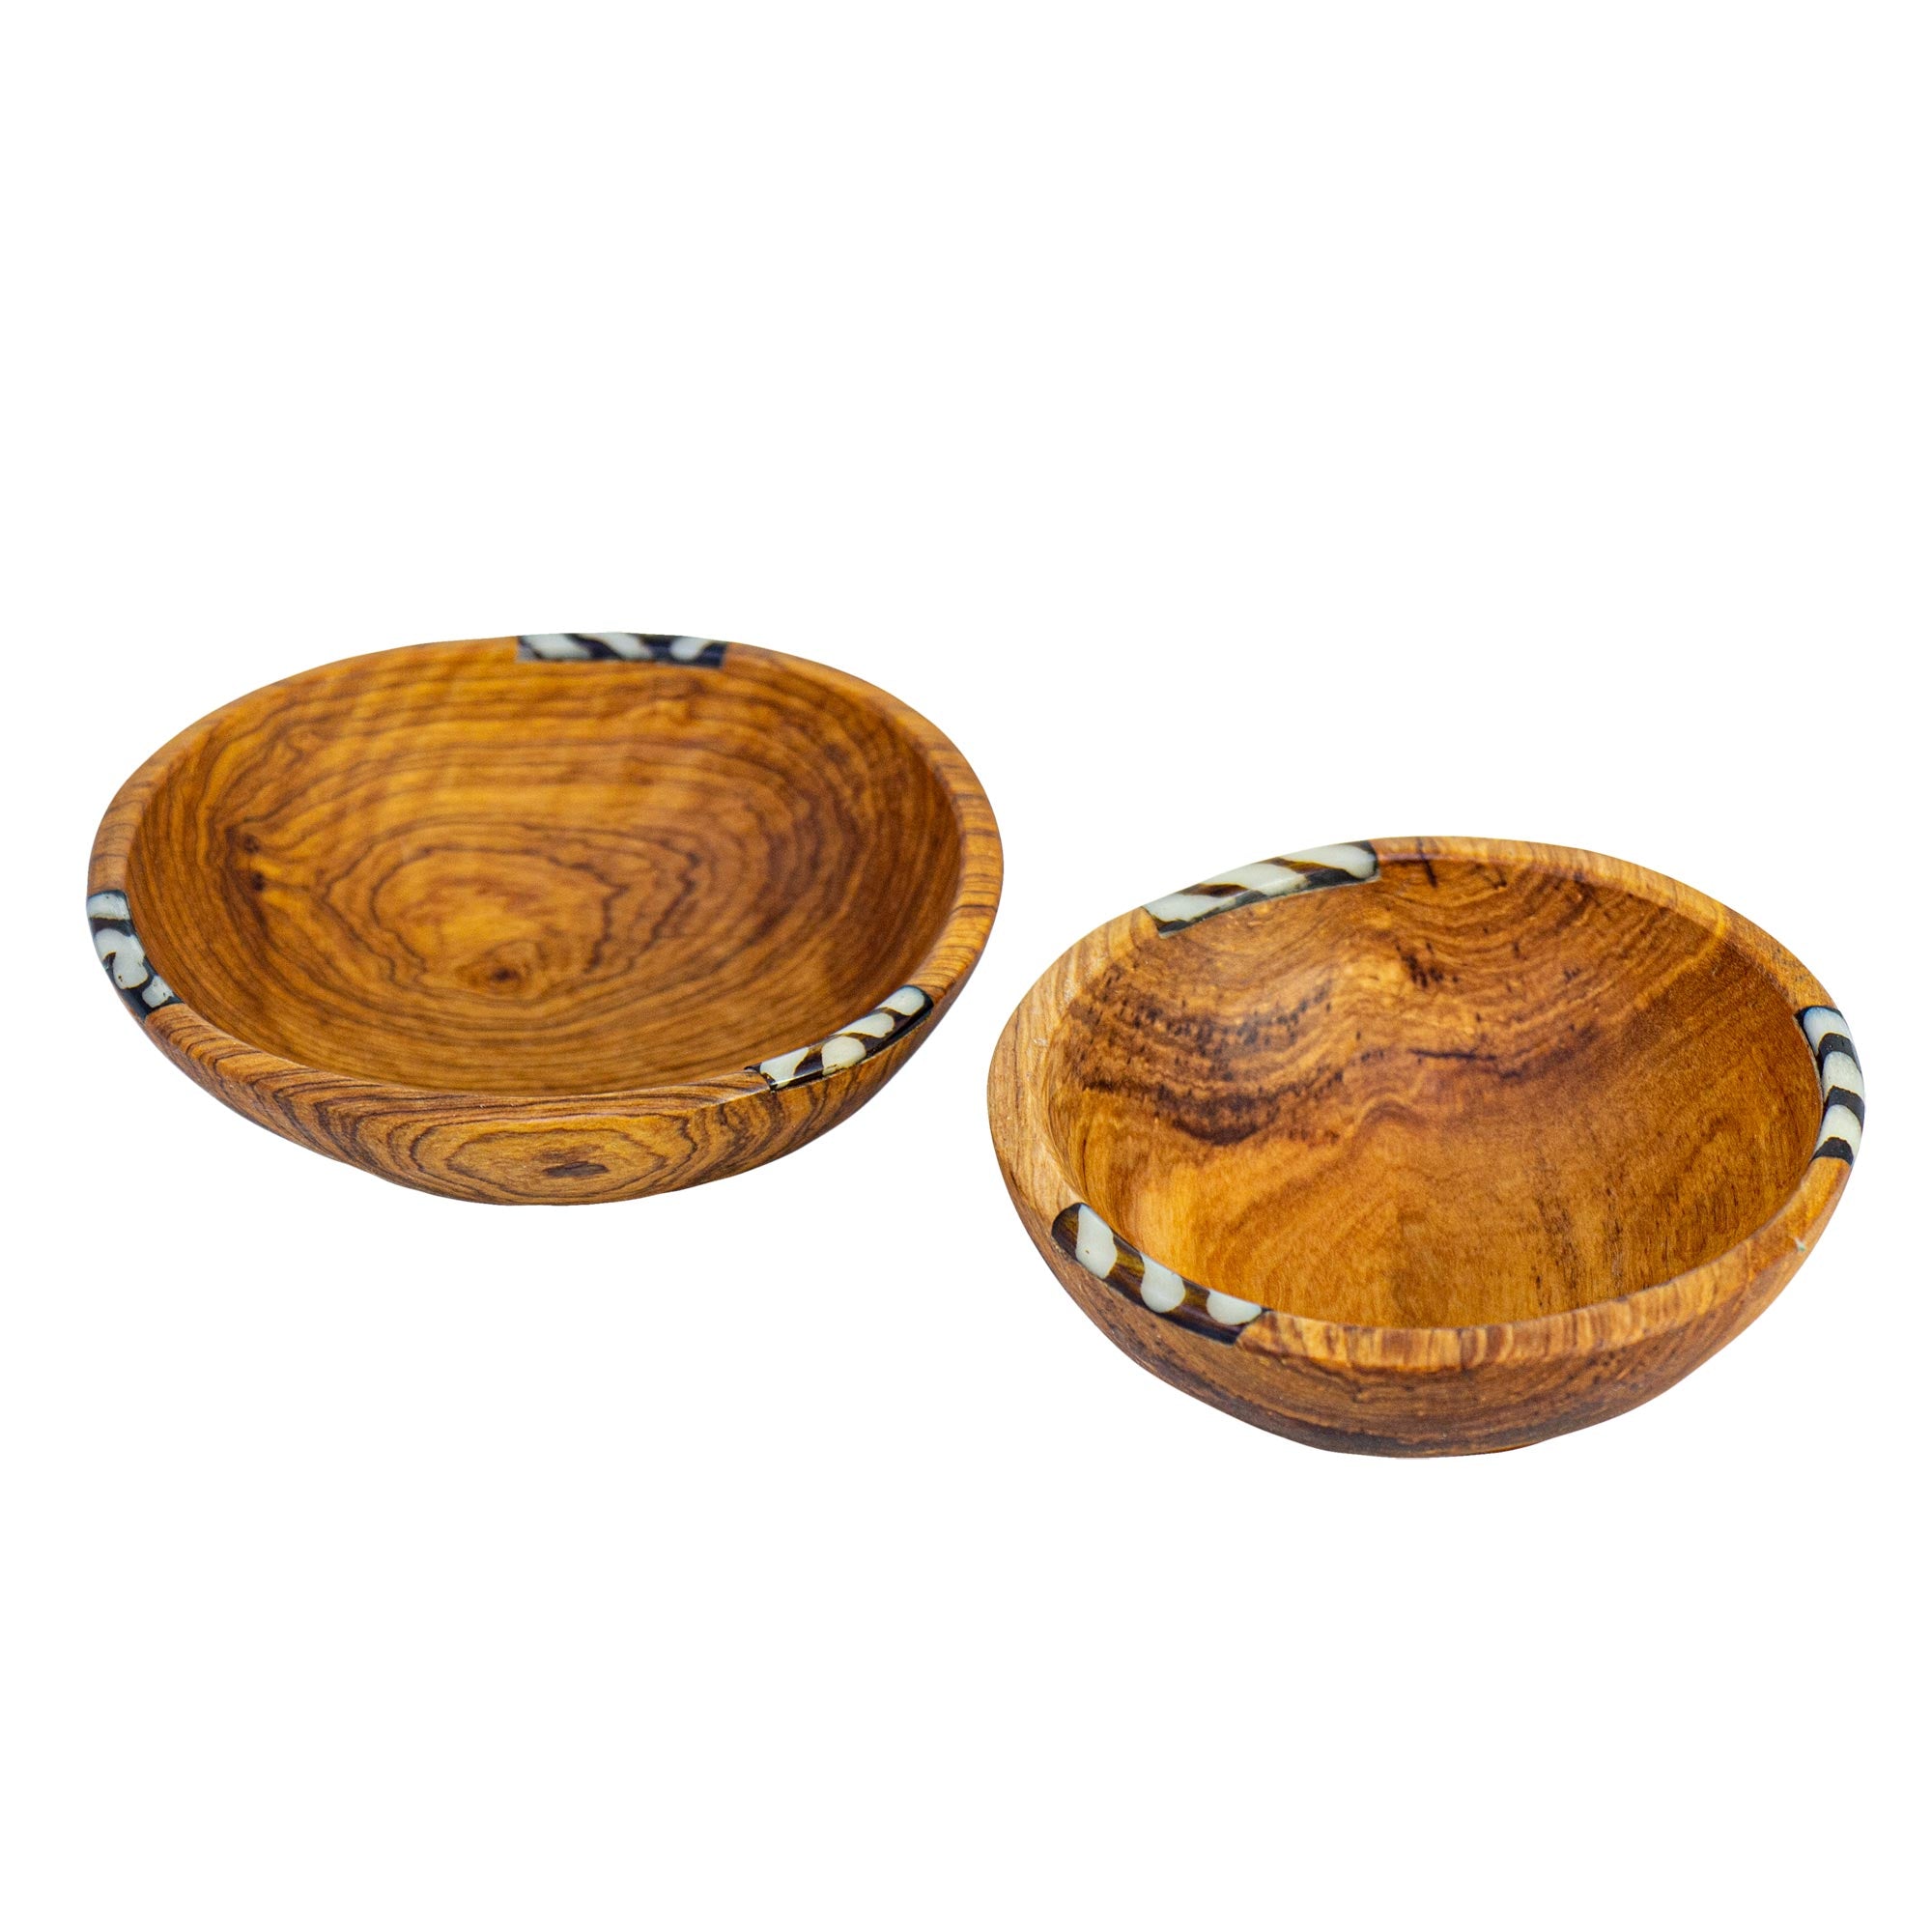 Wood Bowls & Trays - Global Crafts Wholesale